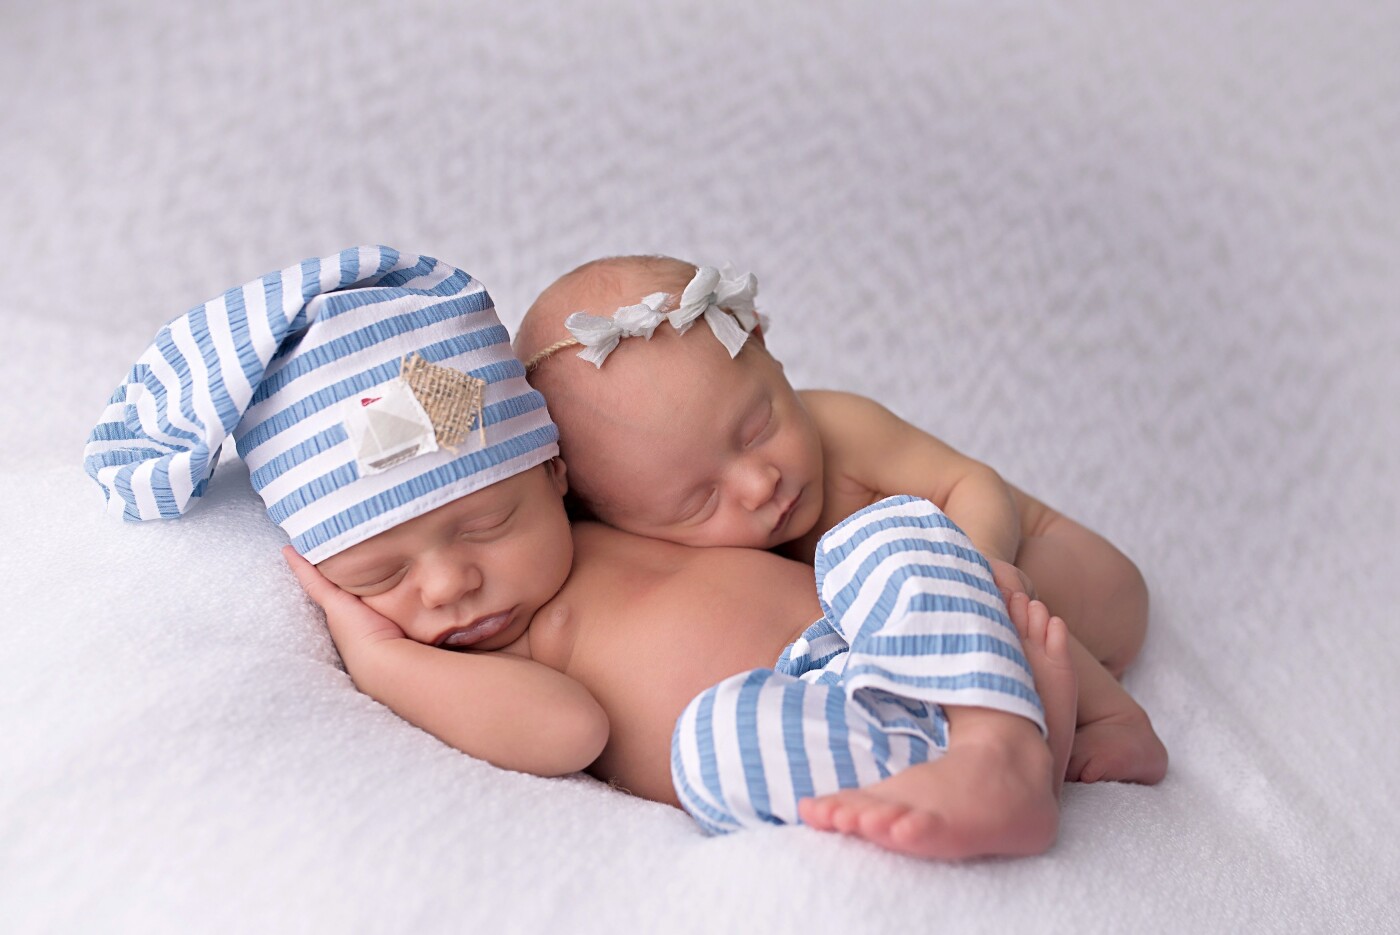 Adorable Asher and Bexley are not twins, but actually cousins born to sisters just 30 hours apart.  While we conducted individual newborn sessions for each of them, we wanted to have a few of them together for the family to document their closeness at birth. 